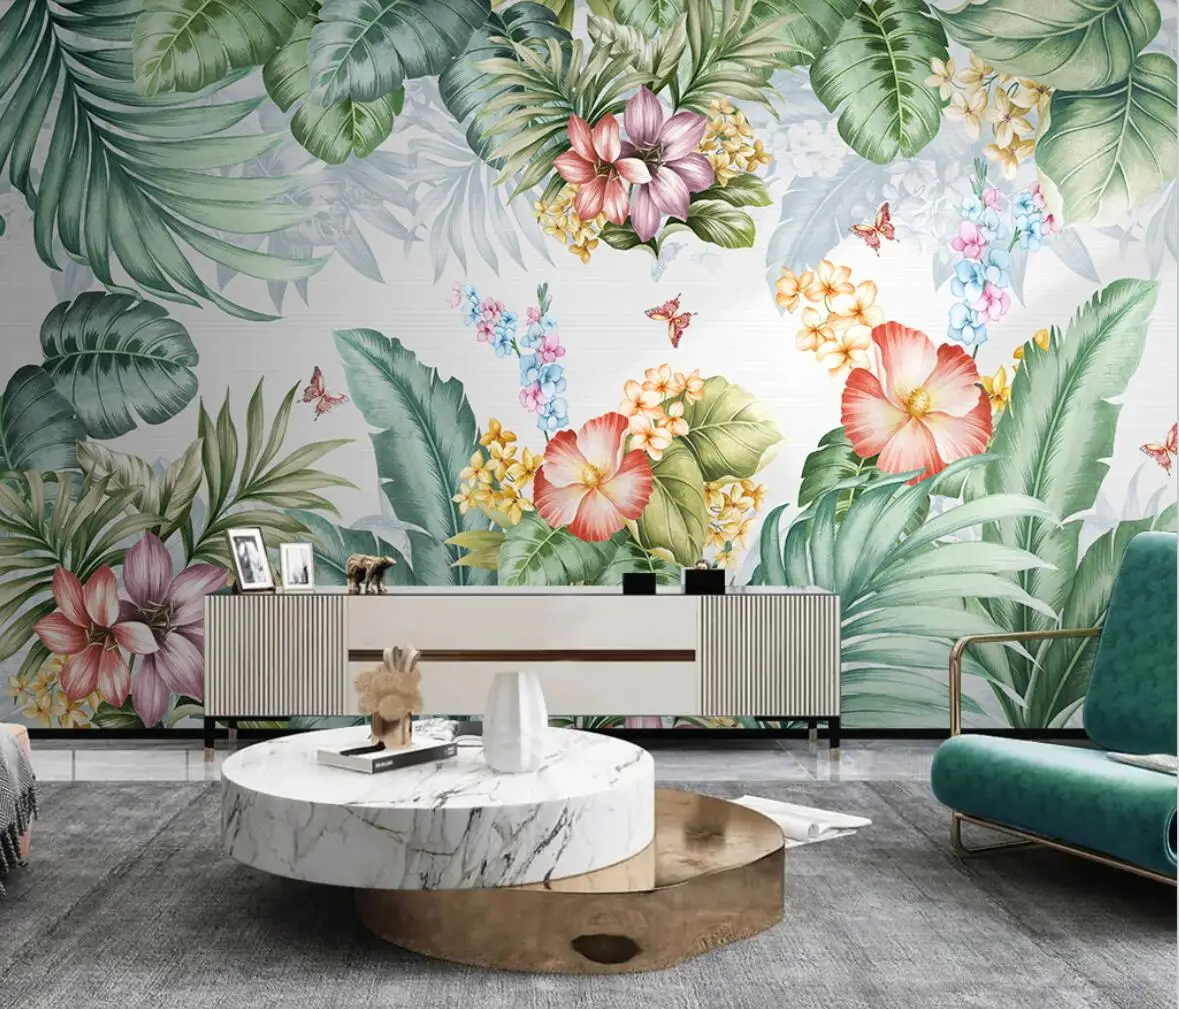 

Custom tropical plants flowers and birds Wallpaper Modern Photo Wall Murals wallpapers for Living Room Bedroom 3D Wall Painting